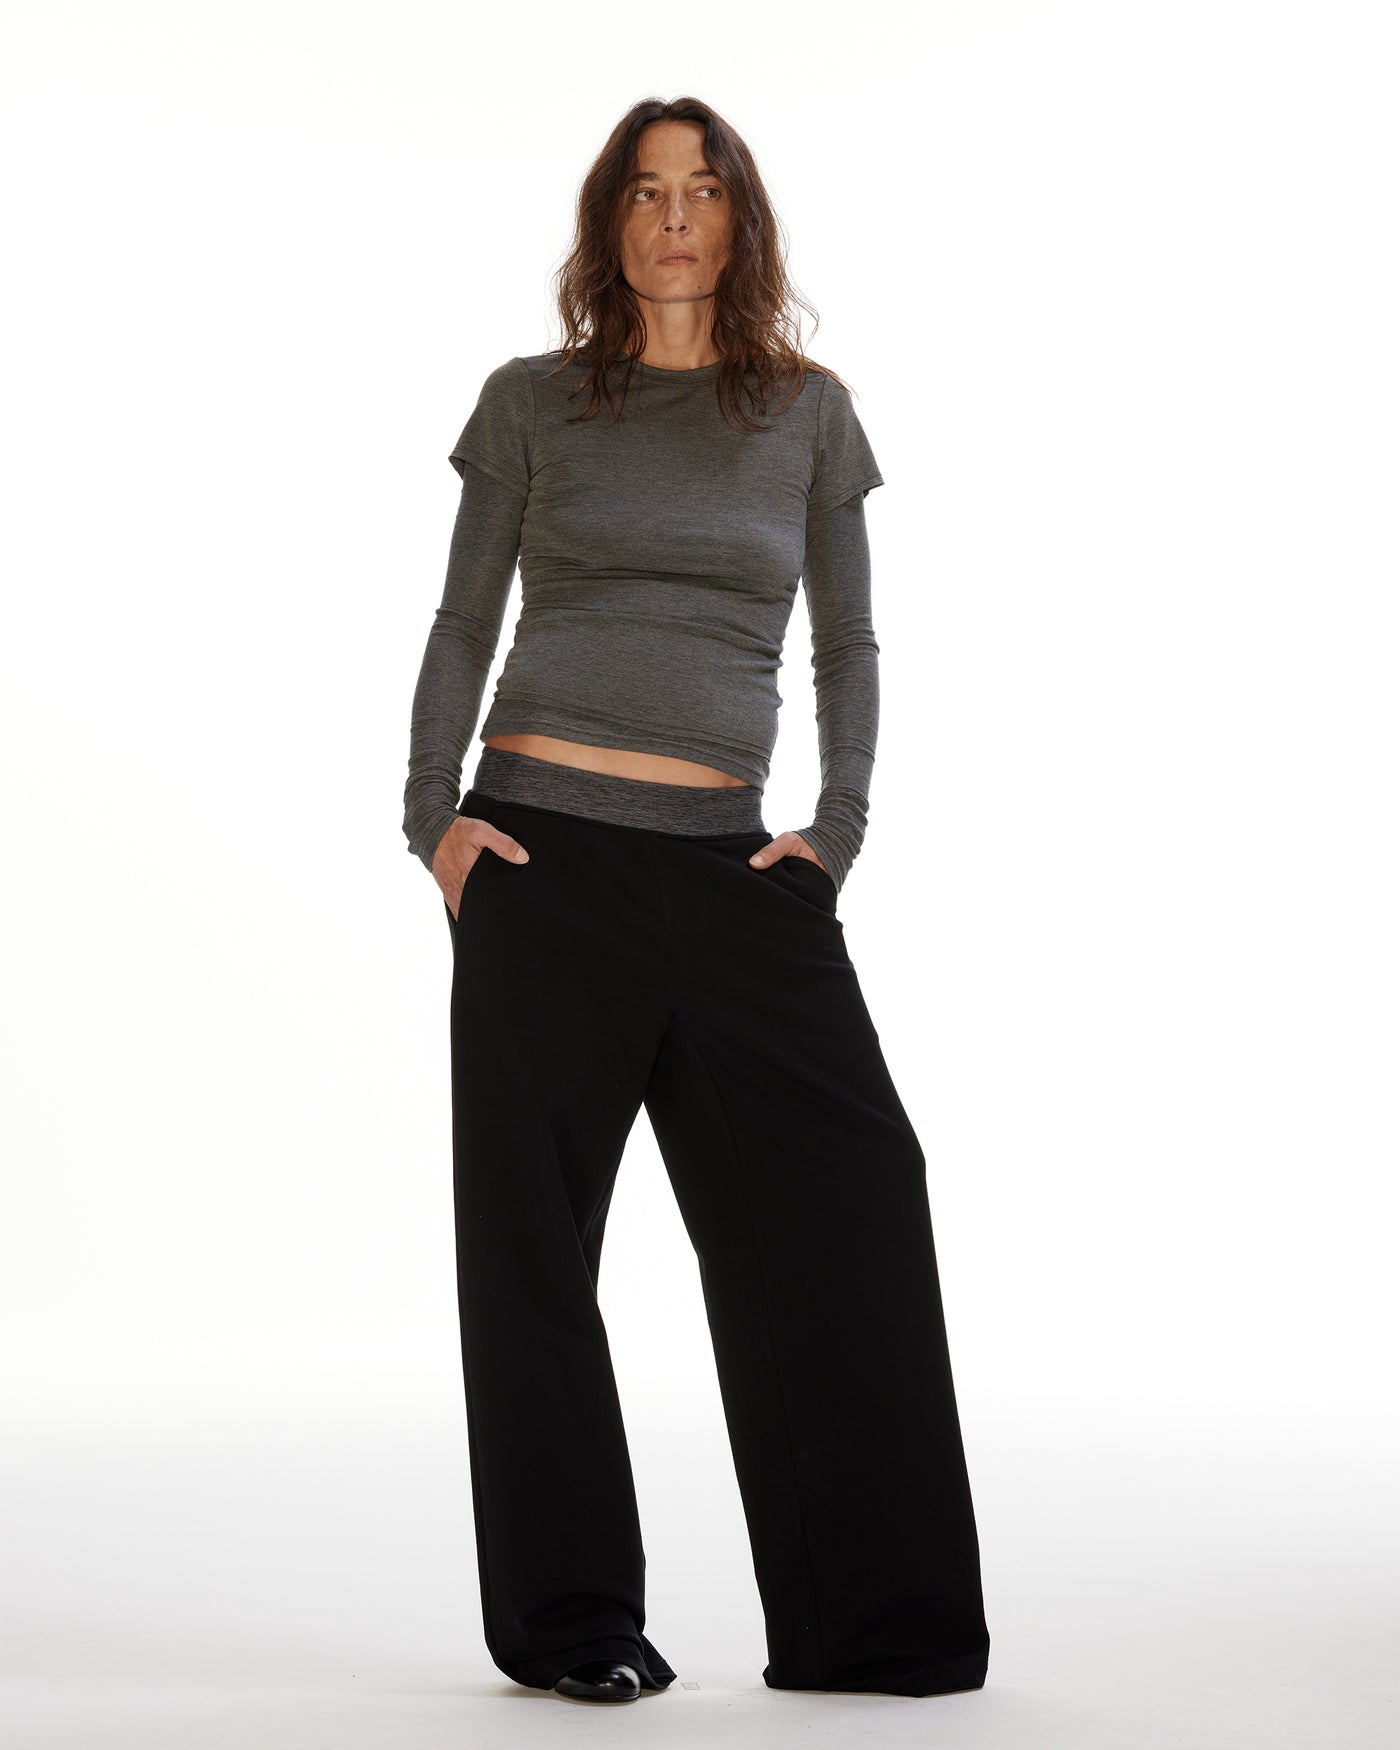 Color Block Loose Sports Trousers